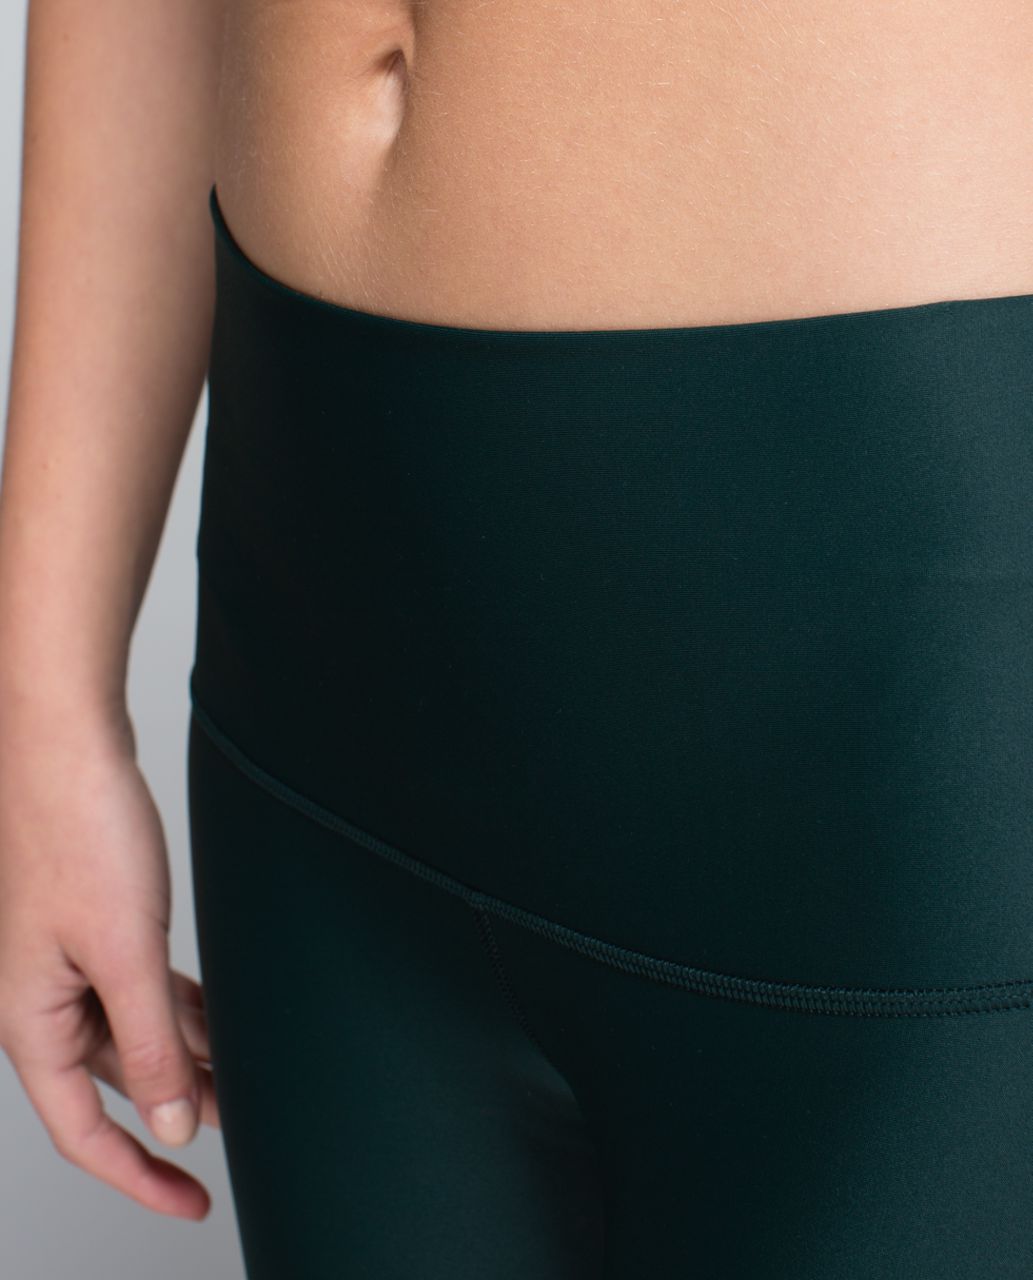 Leggings crafted to support you as you move—up, down, or upside